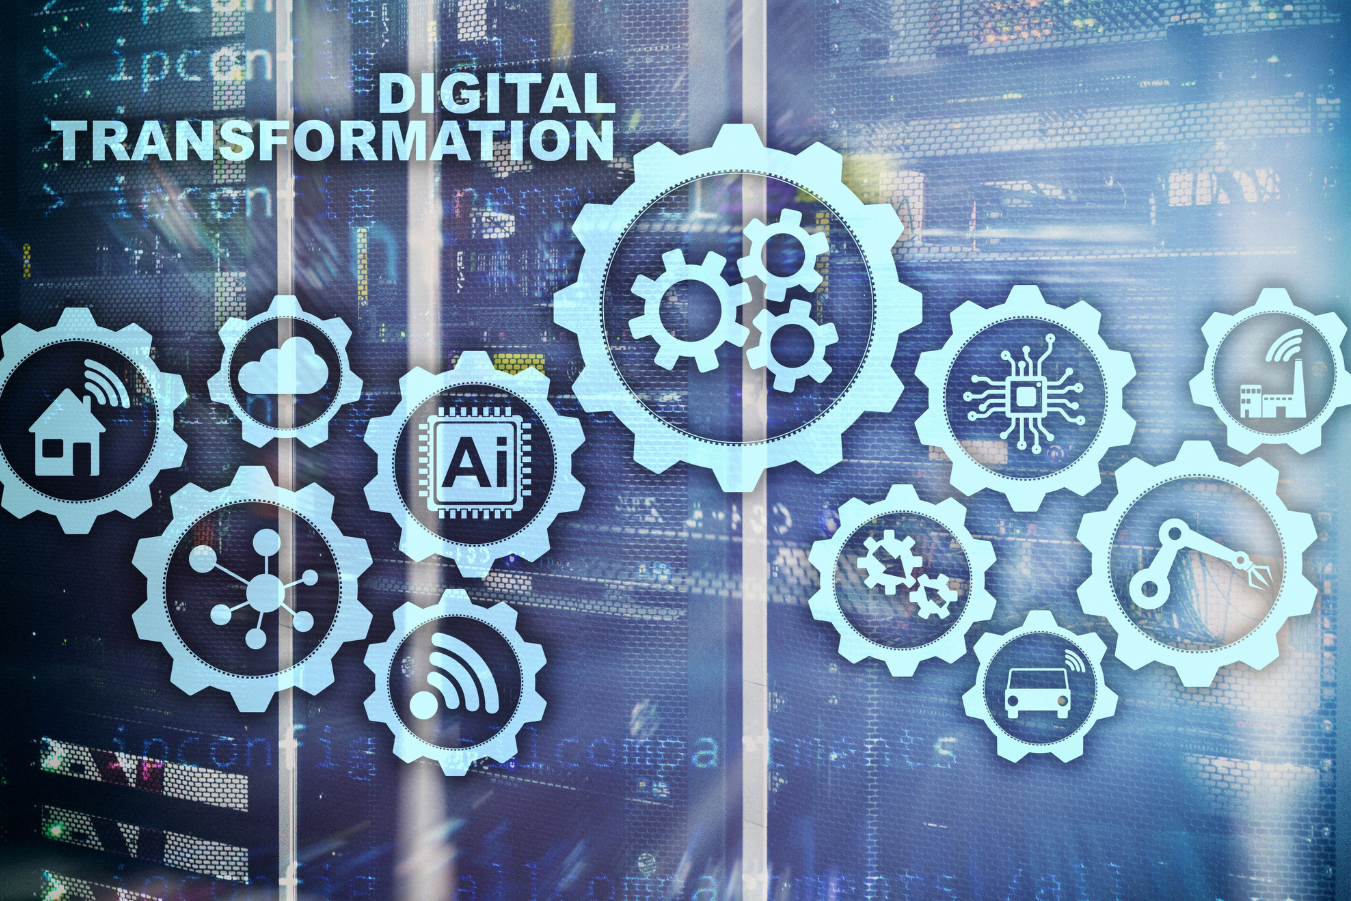 Role of hyperautomation in digital transformation